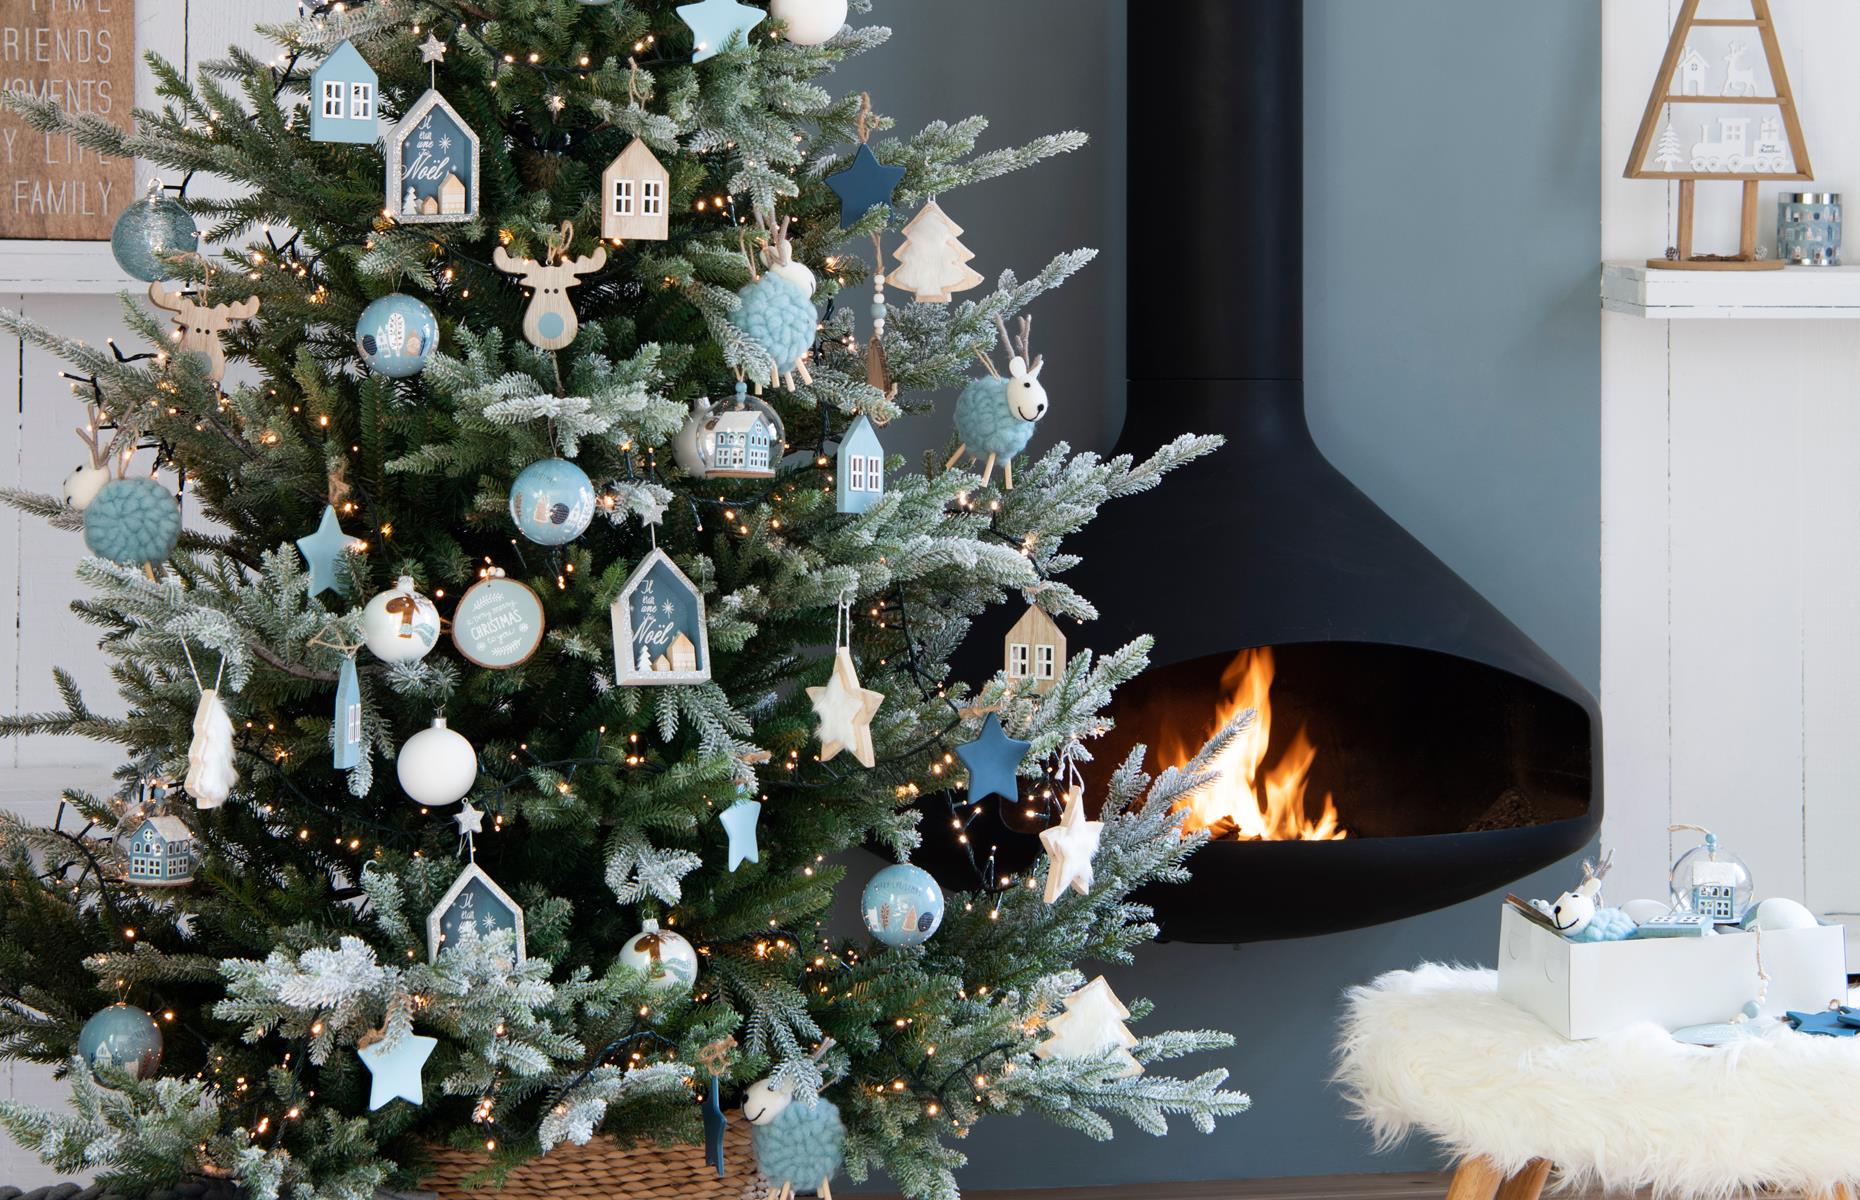 Christmas Tree Decorating Ideas For Every Style And Budget